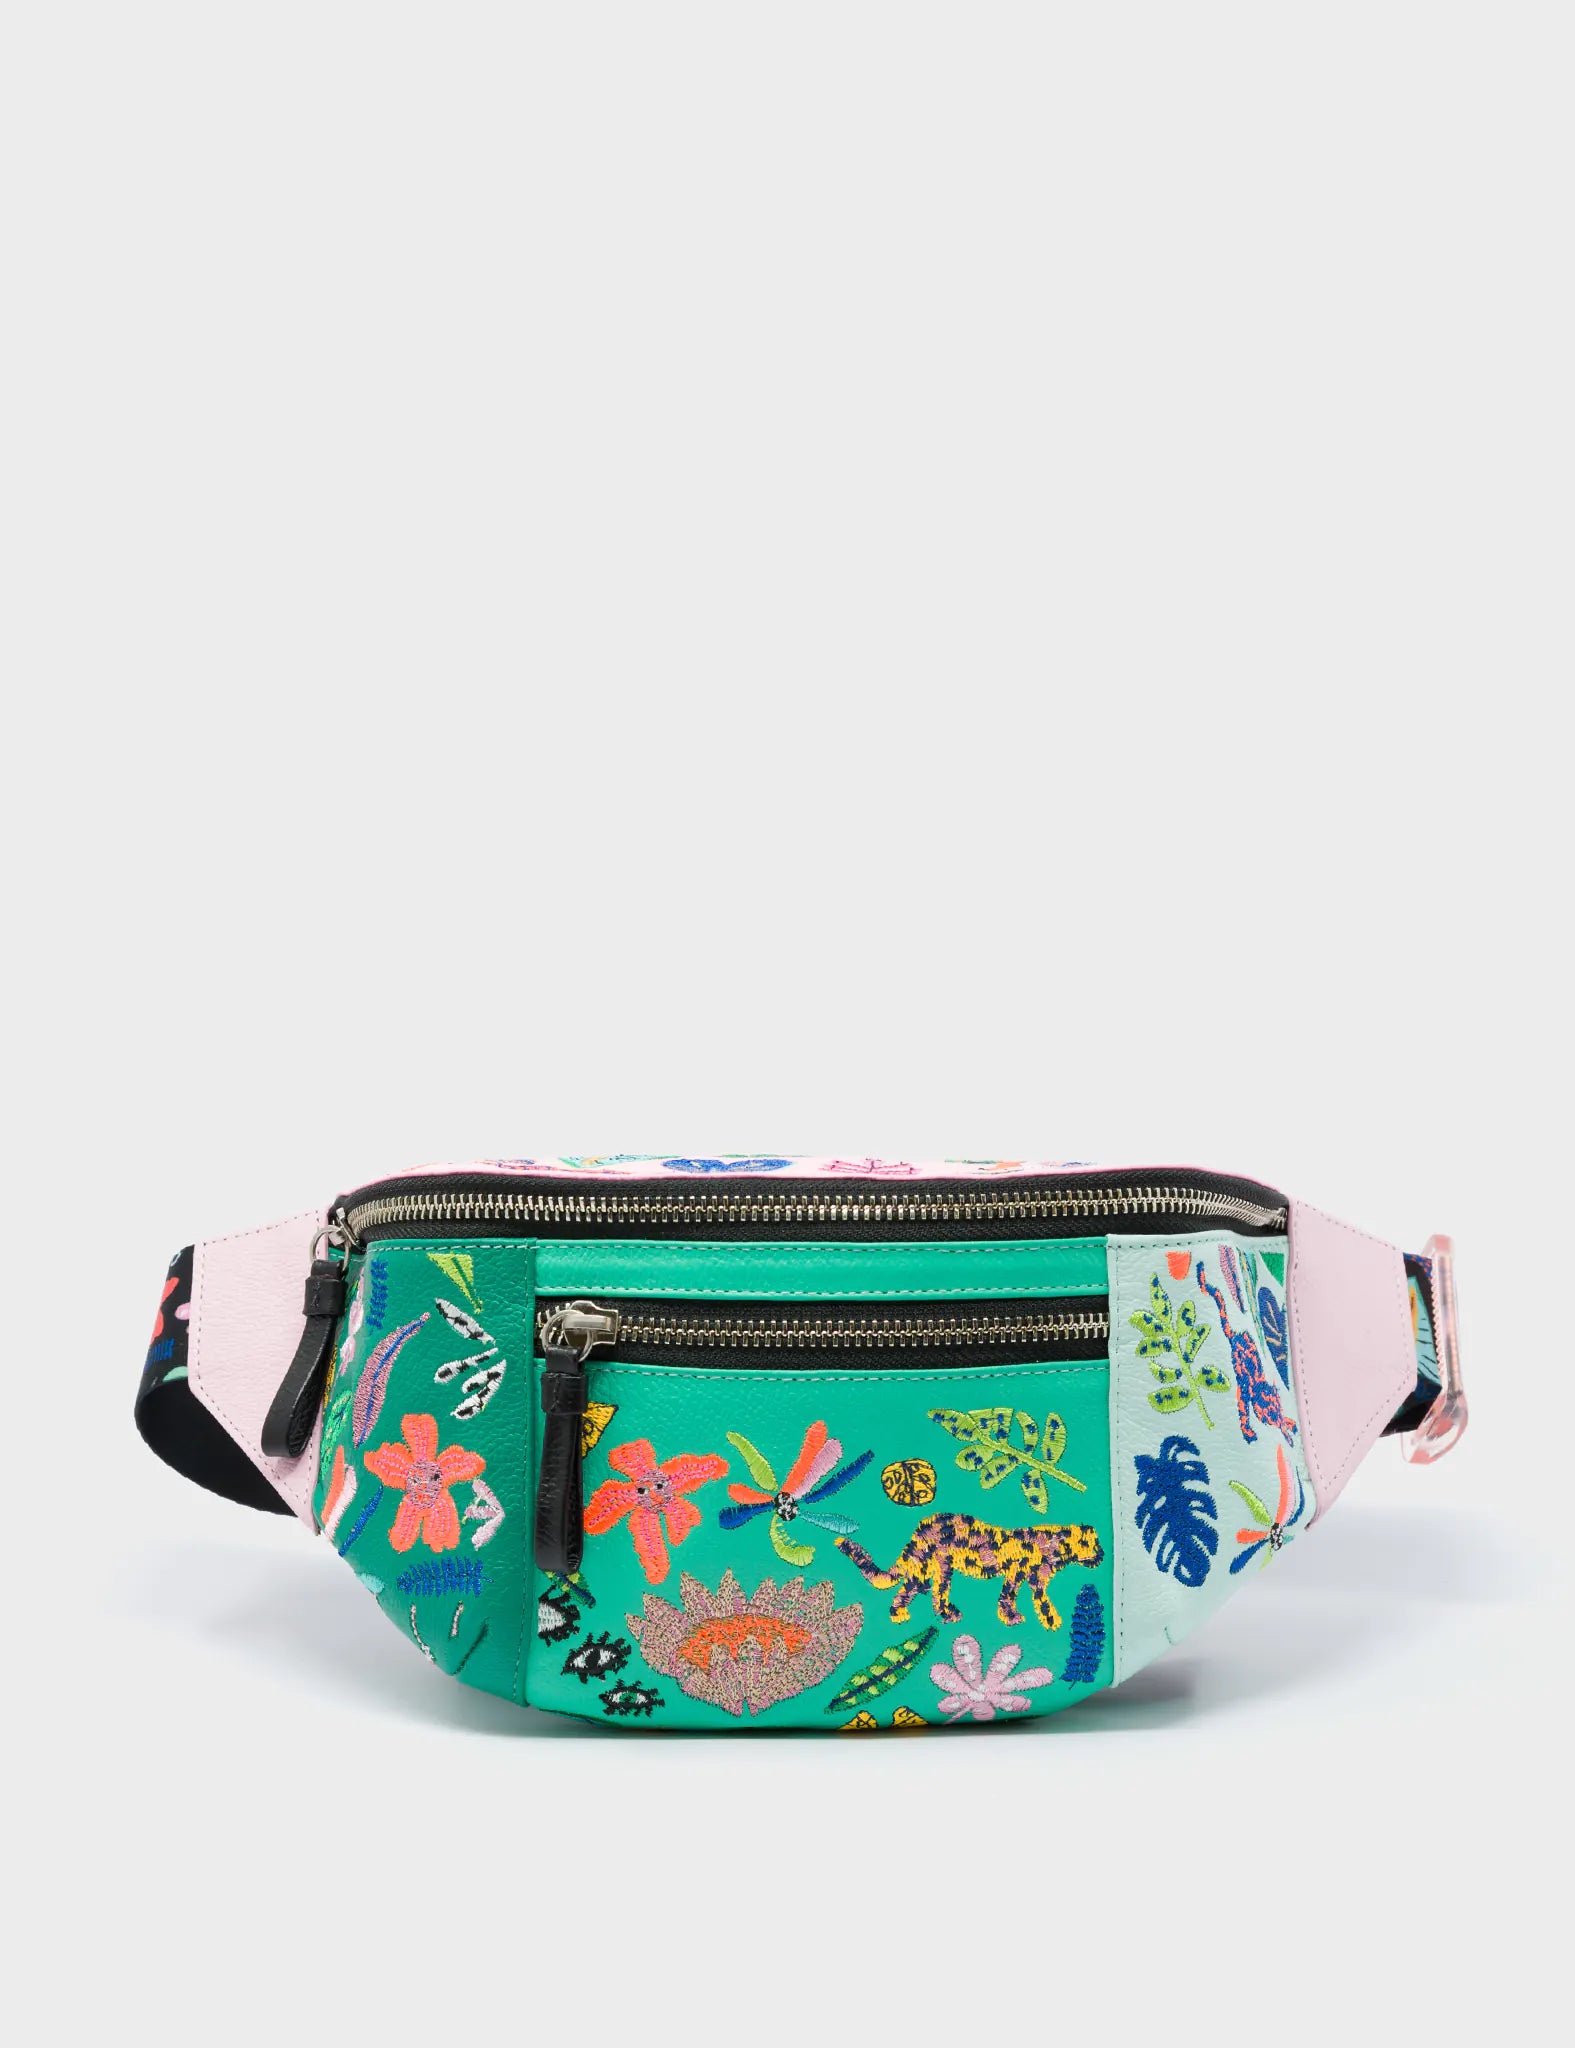 Harold Fanny Pack Green And Lilac Leather - El Trópico Embroidery Design - Front